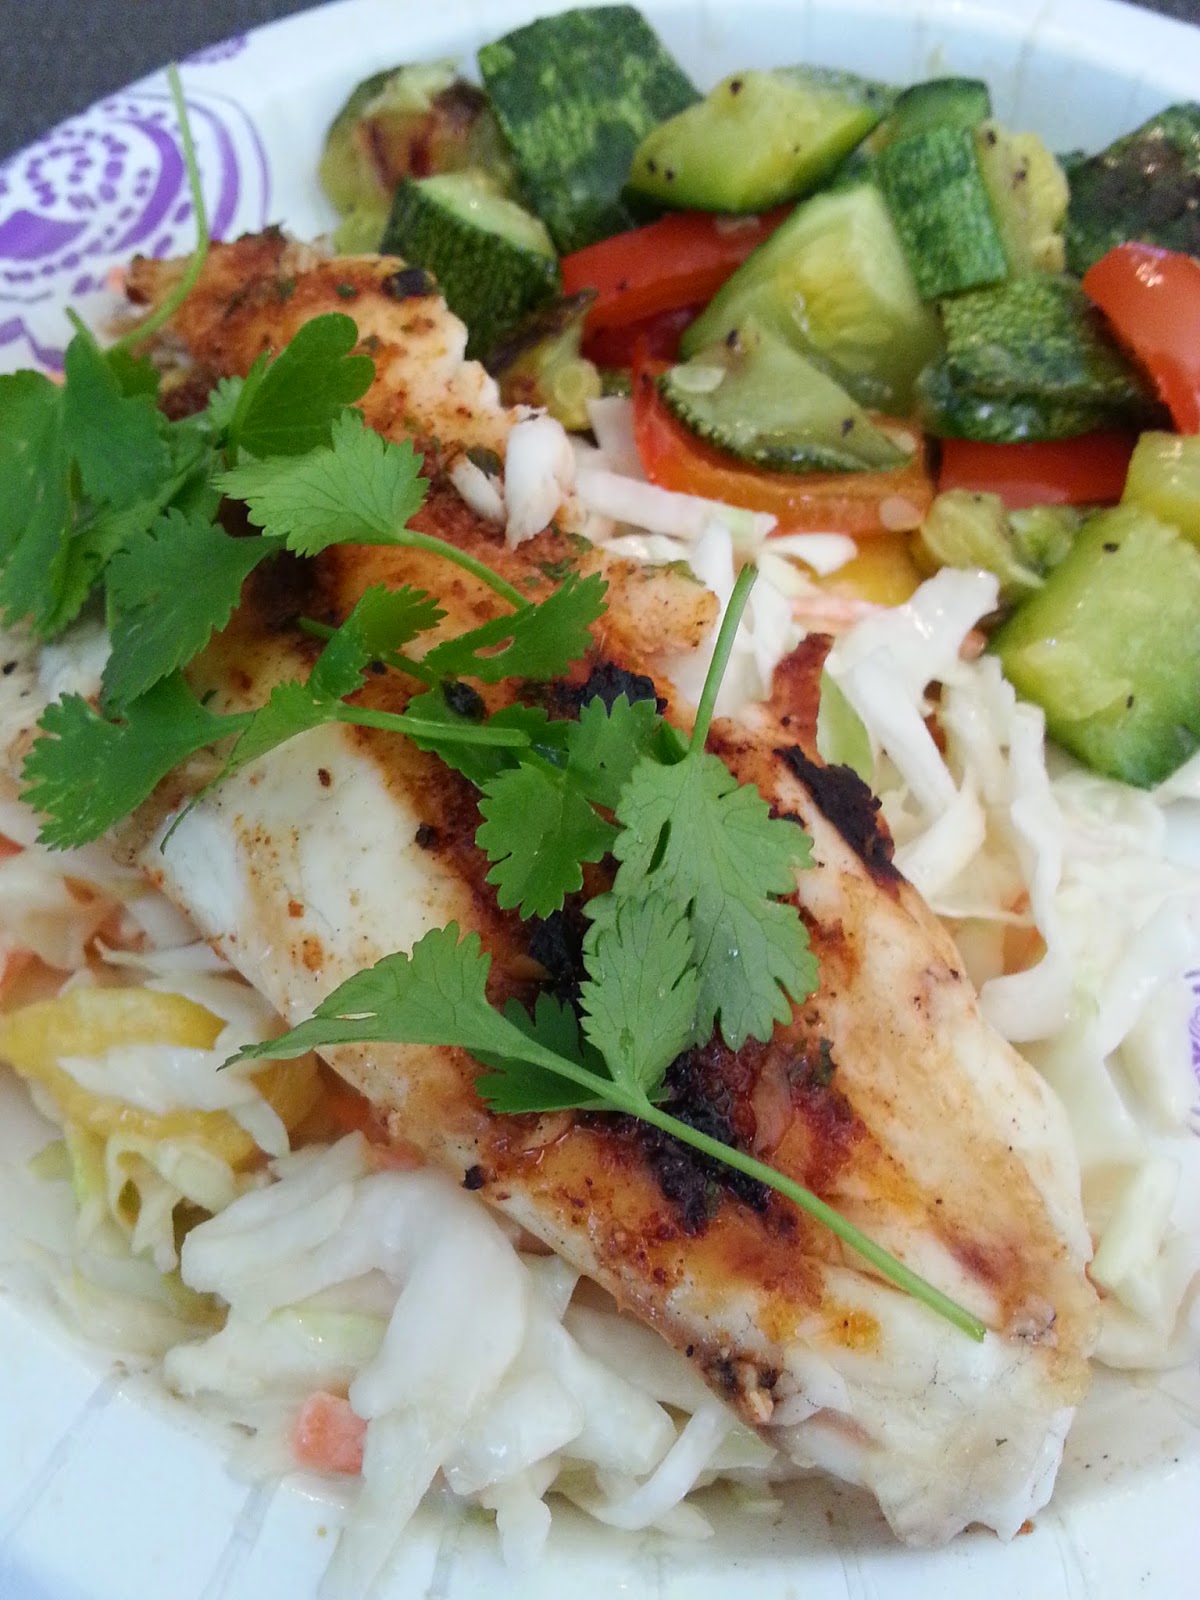 Venus Crossing with Liss: Blackened Tilapia Fish Tacos with Mango Slaw